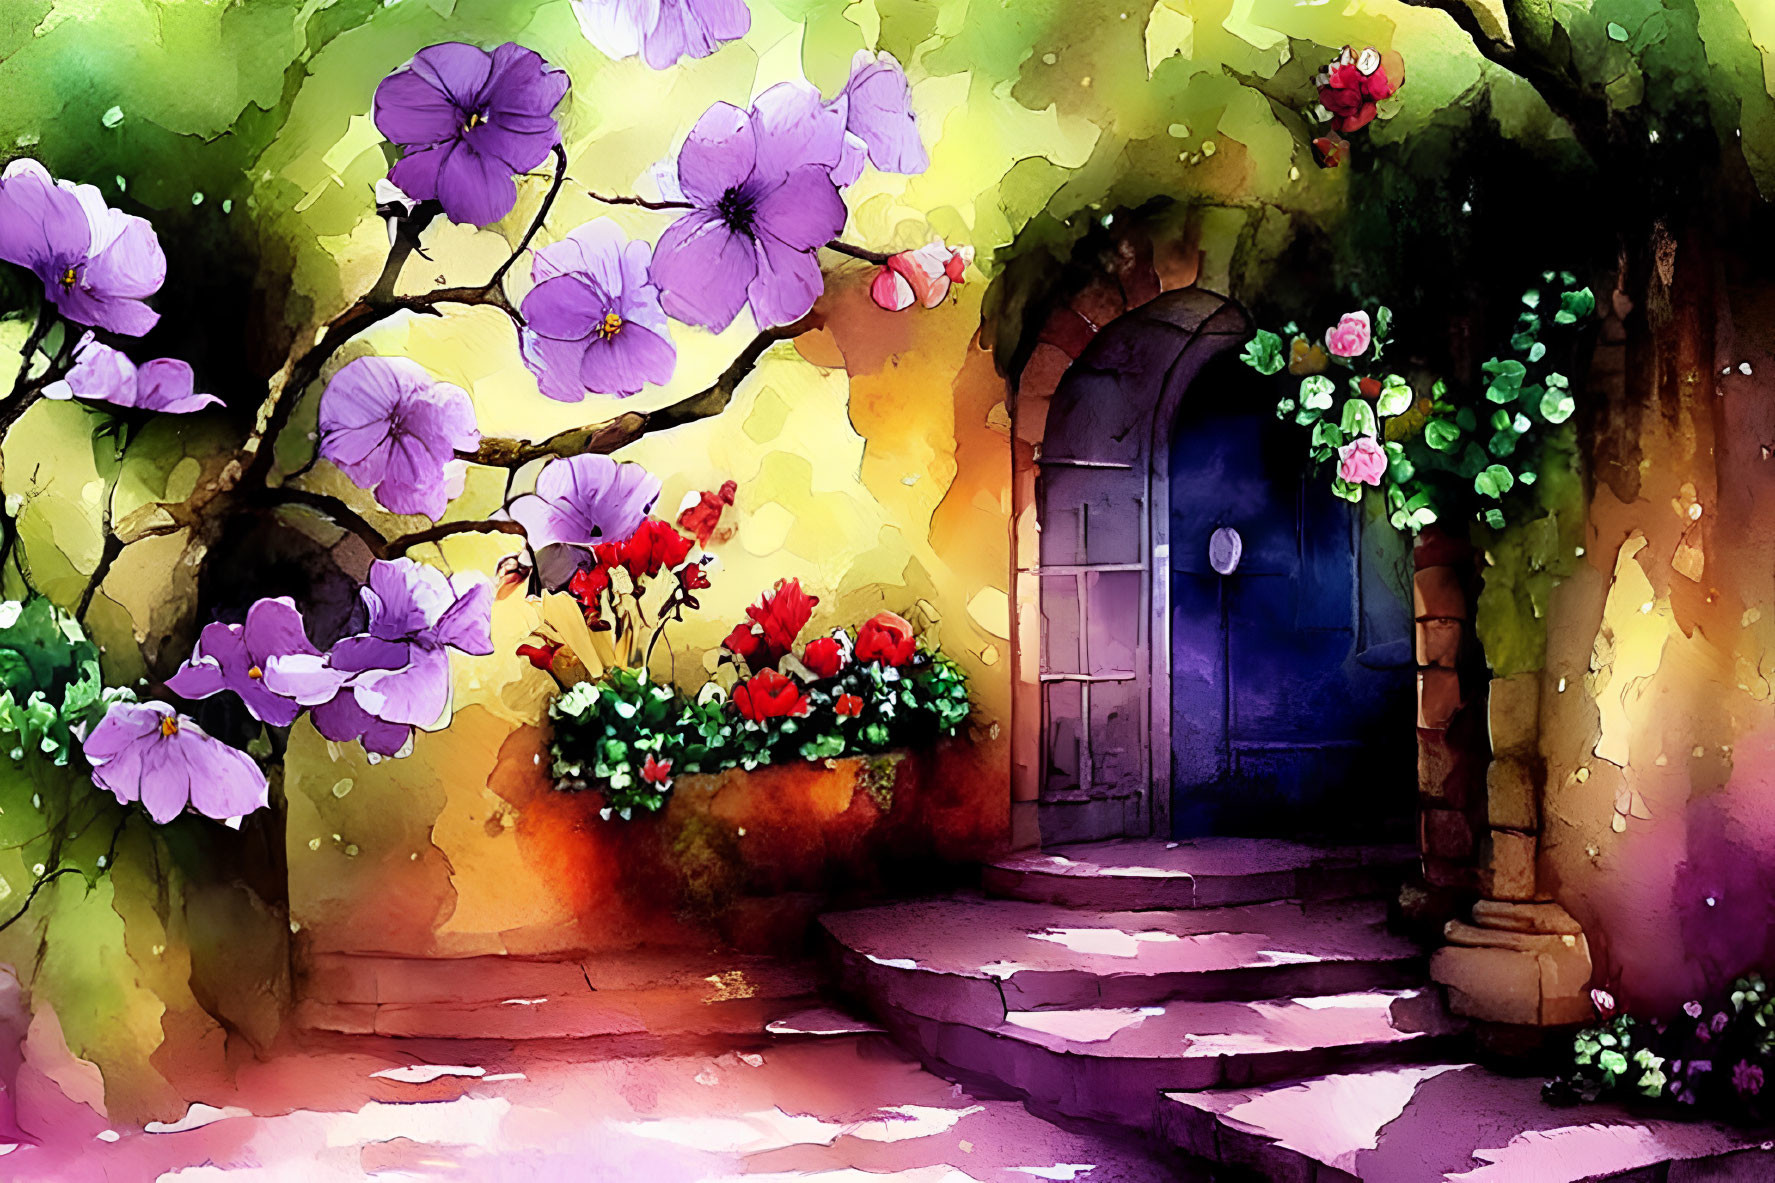 Colorful Watercolor Painting of Archway with Blue Door and Flowers